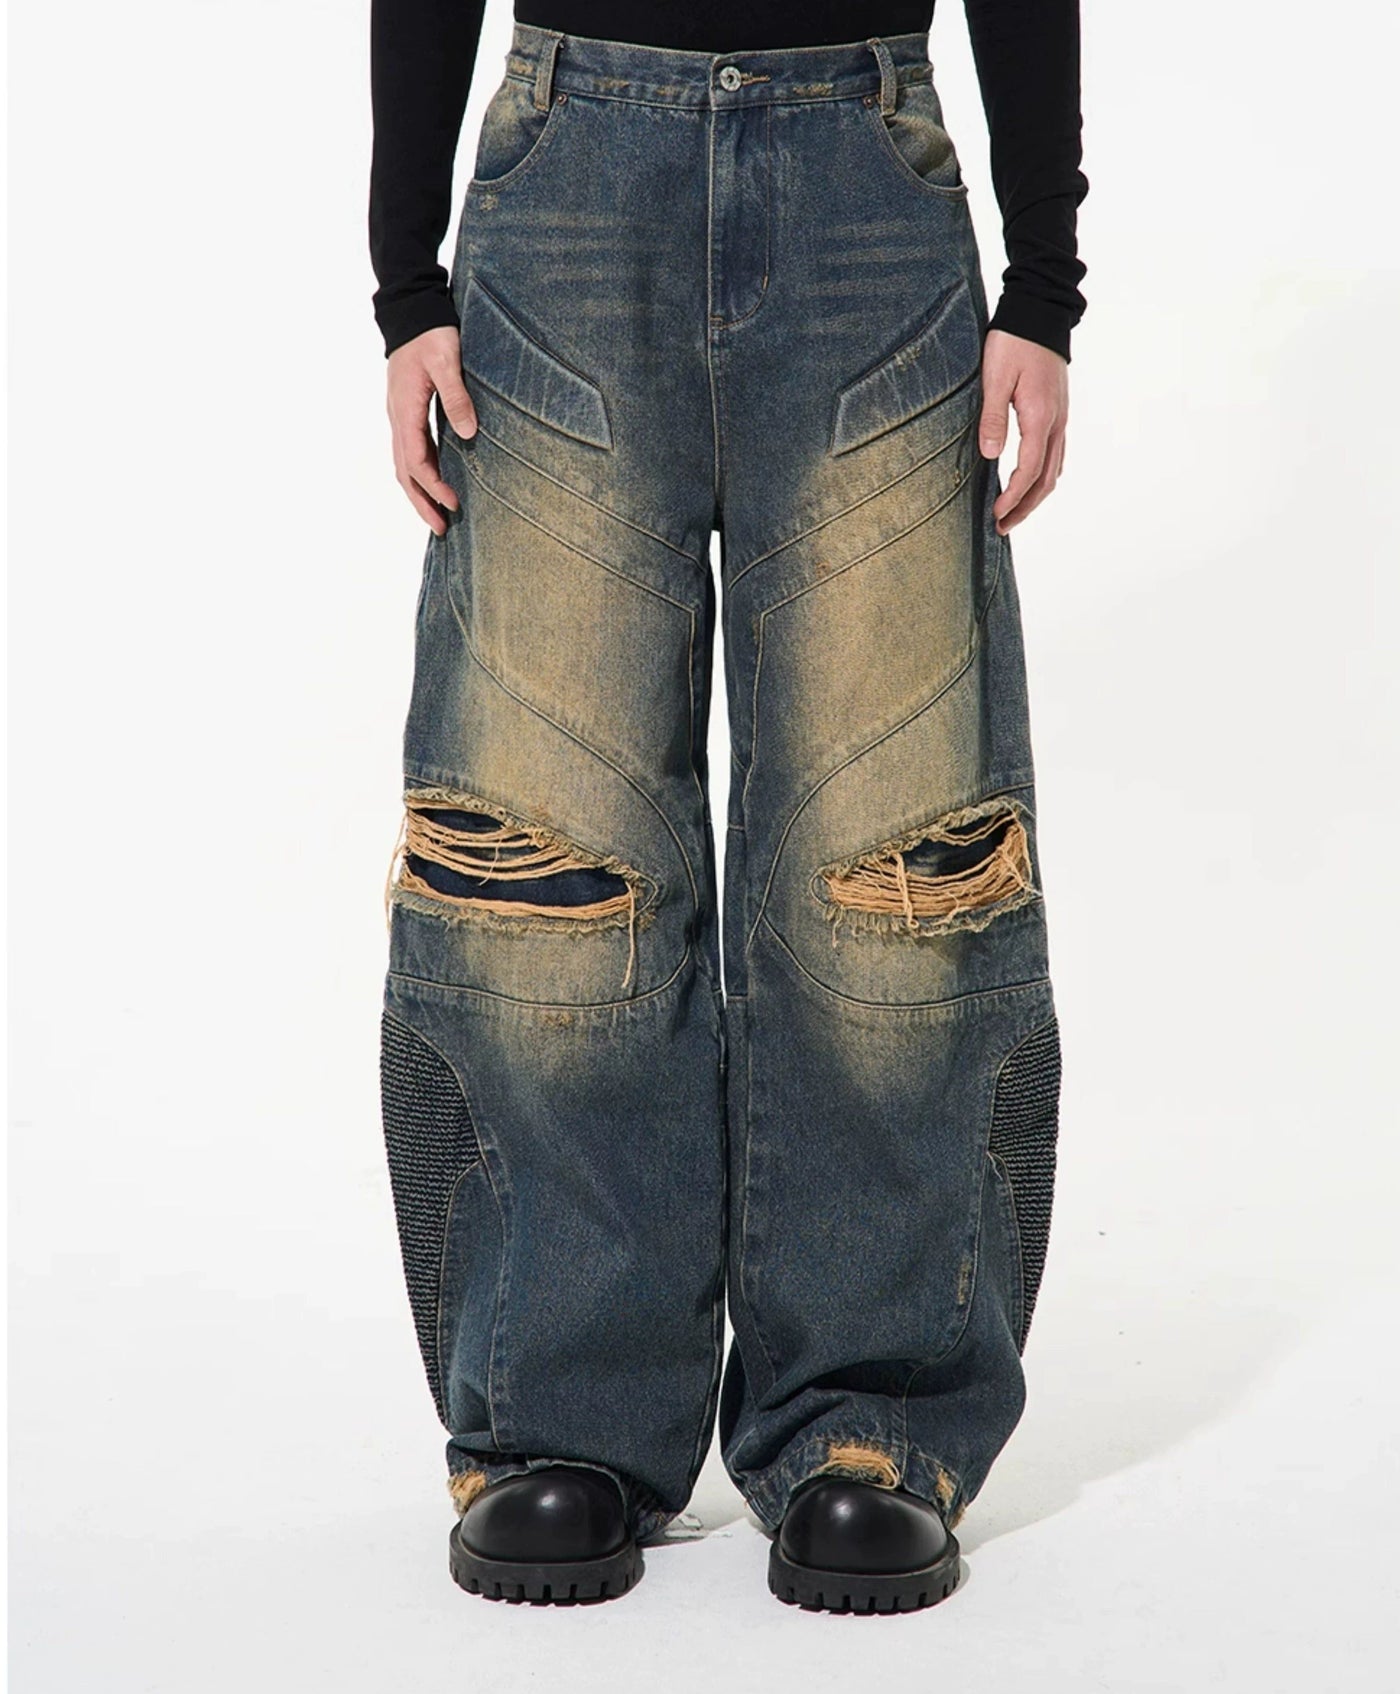 Distressed & Washed Multi-Detail Jeans Korean Street Fashion Jeans By Blind No Plan Shop Online at OH Vault